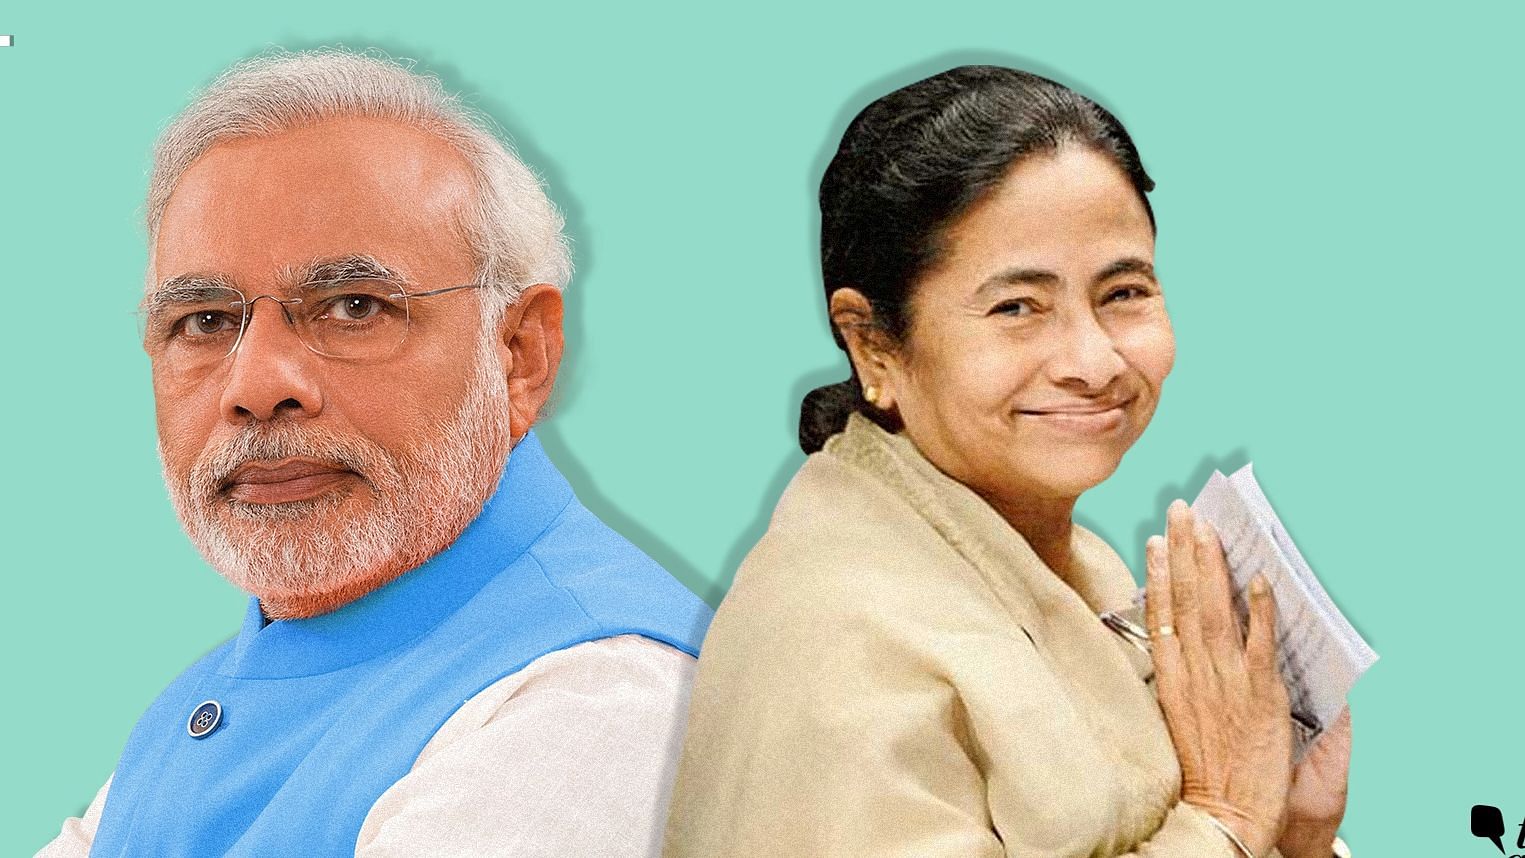 Mamata Banerjee also demanded that Modi’s candidature from Varanasi be cancelled, claiming that he has written “does not know” on many counts in his affidavit.